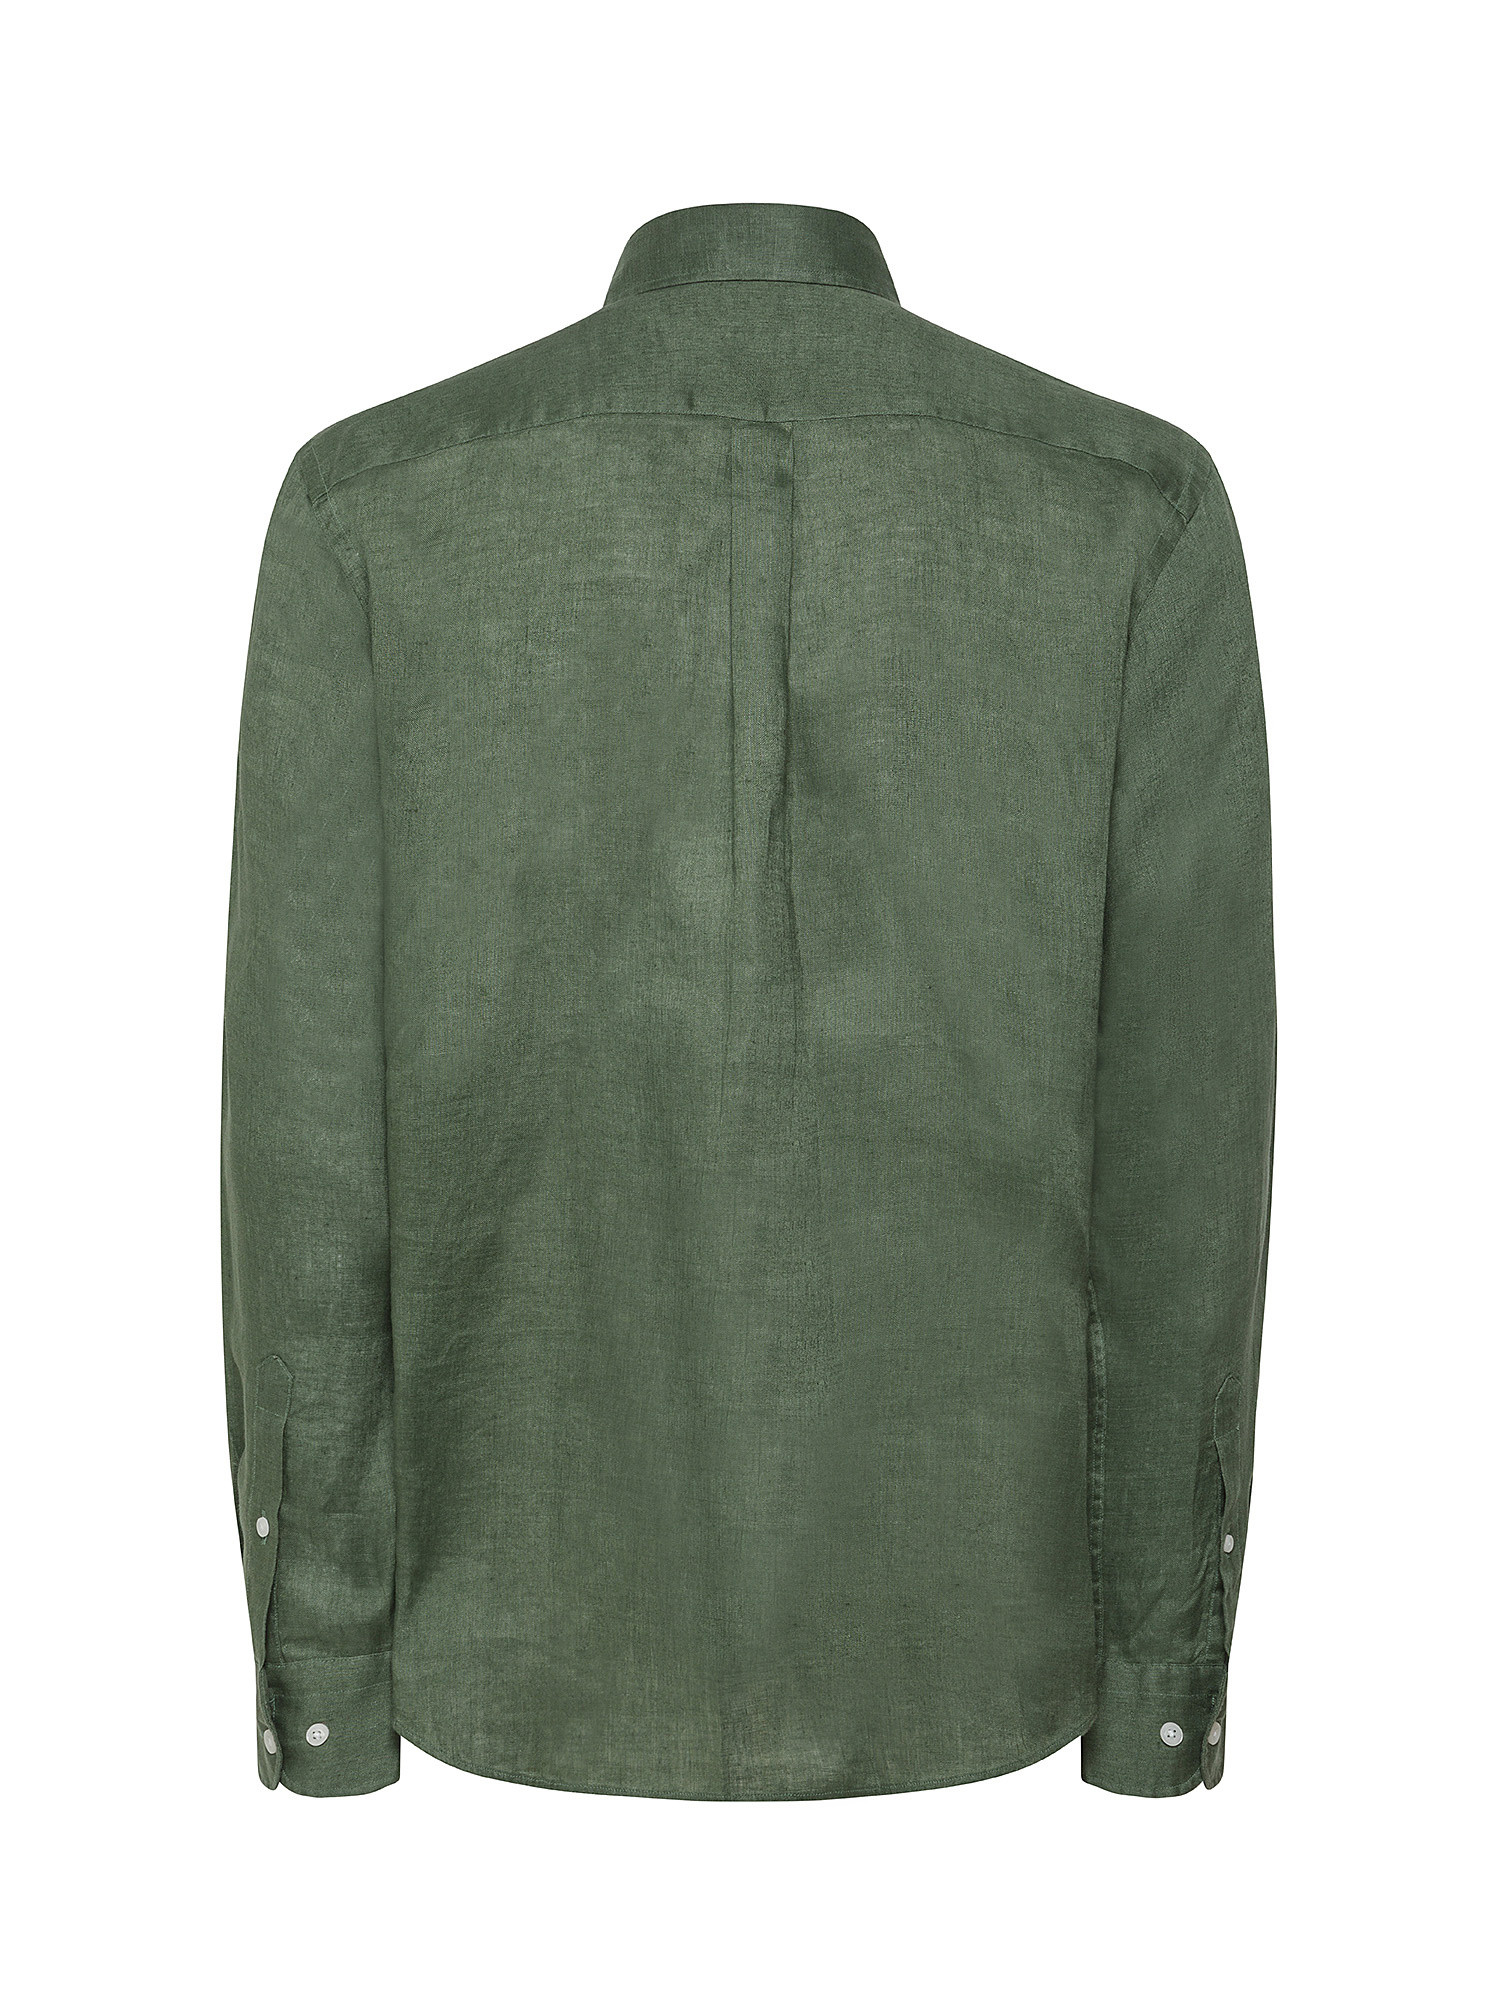 Luca D'Altieri - Tailor fit shirt in pure linen, Green, large image number 1